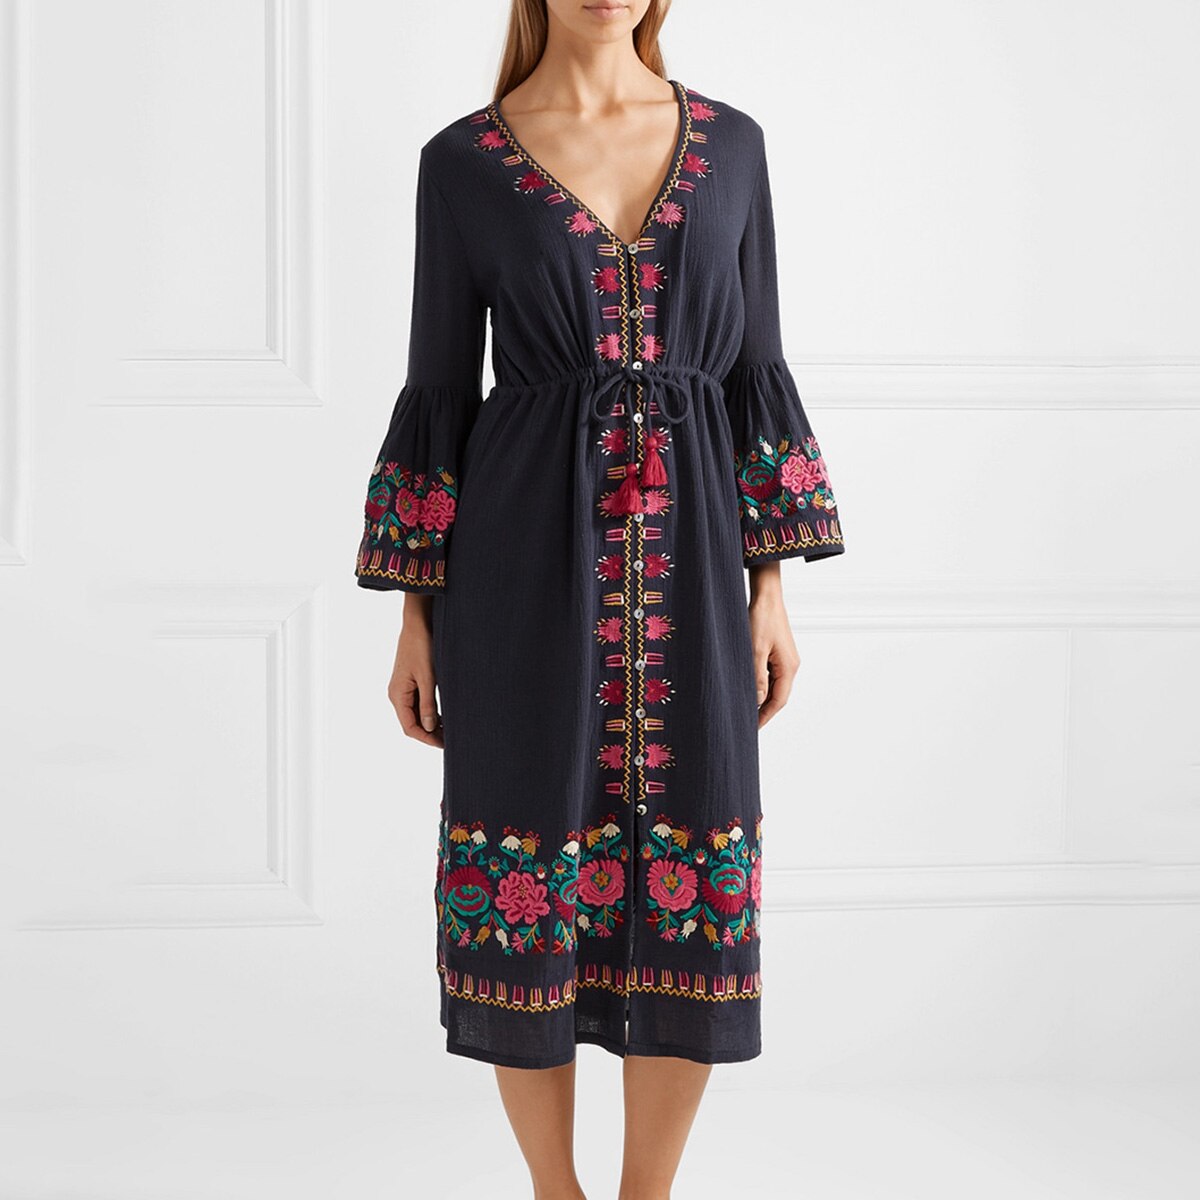 BOHO STYLE EMBROIDERED FLOWER DRESS 